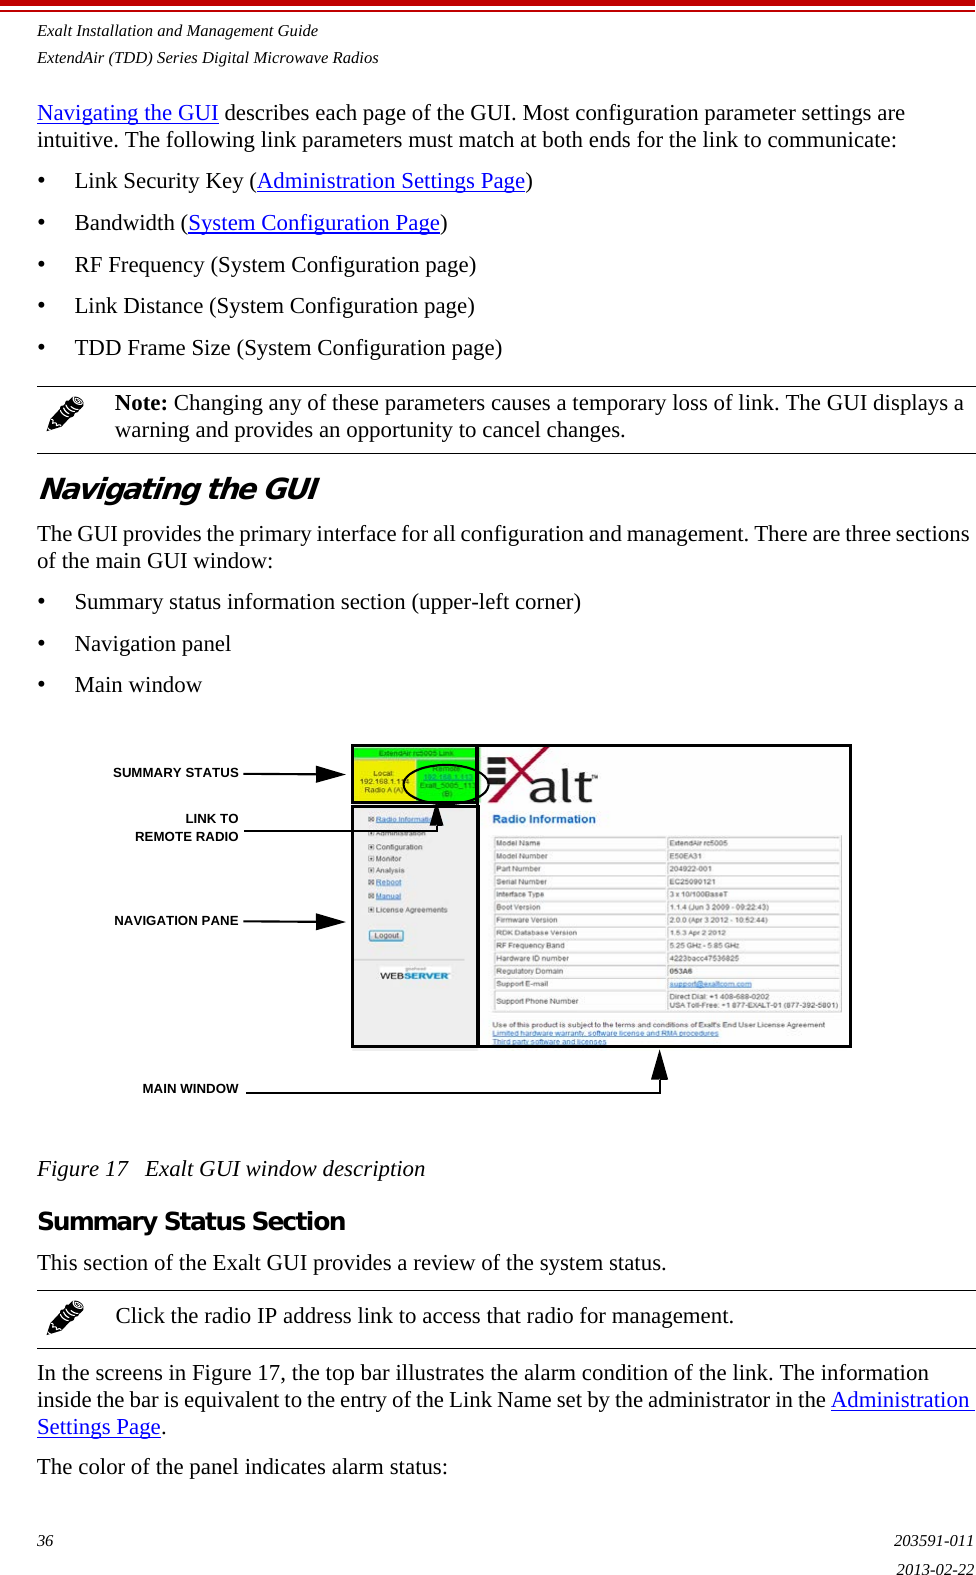 Exalt Installation and Management GuideExtendAir (TDD) Series Digital Microwave Radios36 203591-0112013-02-22Navigating the GUI describes each page of the GUI. Most configuration parameter settings are intuitive. The following link parameters must match at both ends for the link to communicate:•Link Security Key (Administration Settings Page)•Bandwidth (System Configuration Page)•RF Frequency (System Configuration page)•Link Distance (System Configuration page)•TDD Frame Size (System Configuration page)Navigating the GUIThe GUI provides the primary interface for all configuration and management. There are three sections of the main GUI window:•Summary status information section (upper-left corner)•Navigation panel •Main windowFigure 17   Exalt GUI window descriptionSummary Status SectionThis section of the Exalt GUI provides a review of the system status. In the screens in Figure 17, the top bar illustrates the alarm condition of the link. The information inside the bar is equivalent to the entry of the Link Name set by the administrator in the Administration Settings Page.The color of the panel indicates alarm status: Note: Changing any of these parameters causes a temporary loss of link. The GUI displays a warning and provides an opportunity to cancel changes.Click the radio IP address link to access that radio for management.SUMMARY STATUSNAVIGATION PANEMAIN WINDOWLINK TOREMOTE RADIO